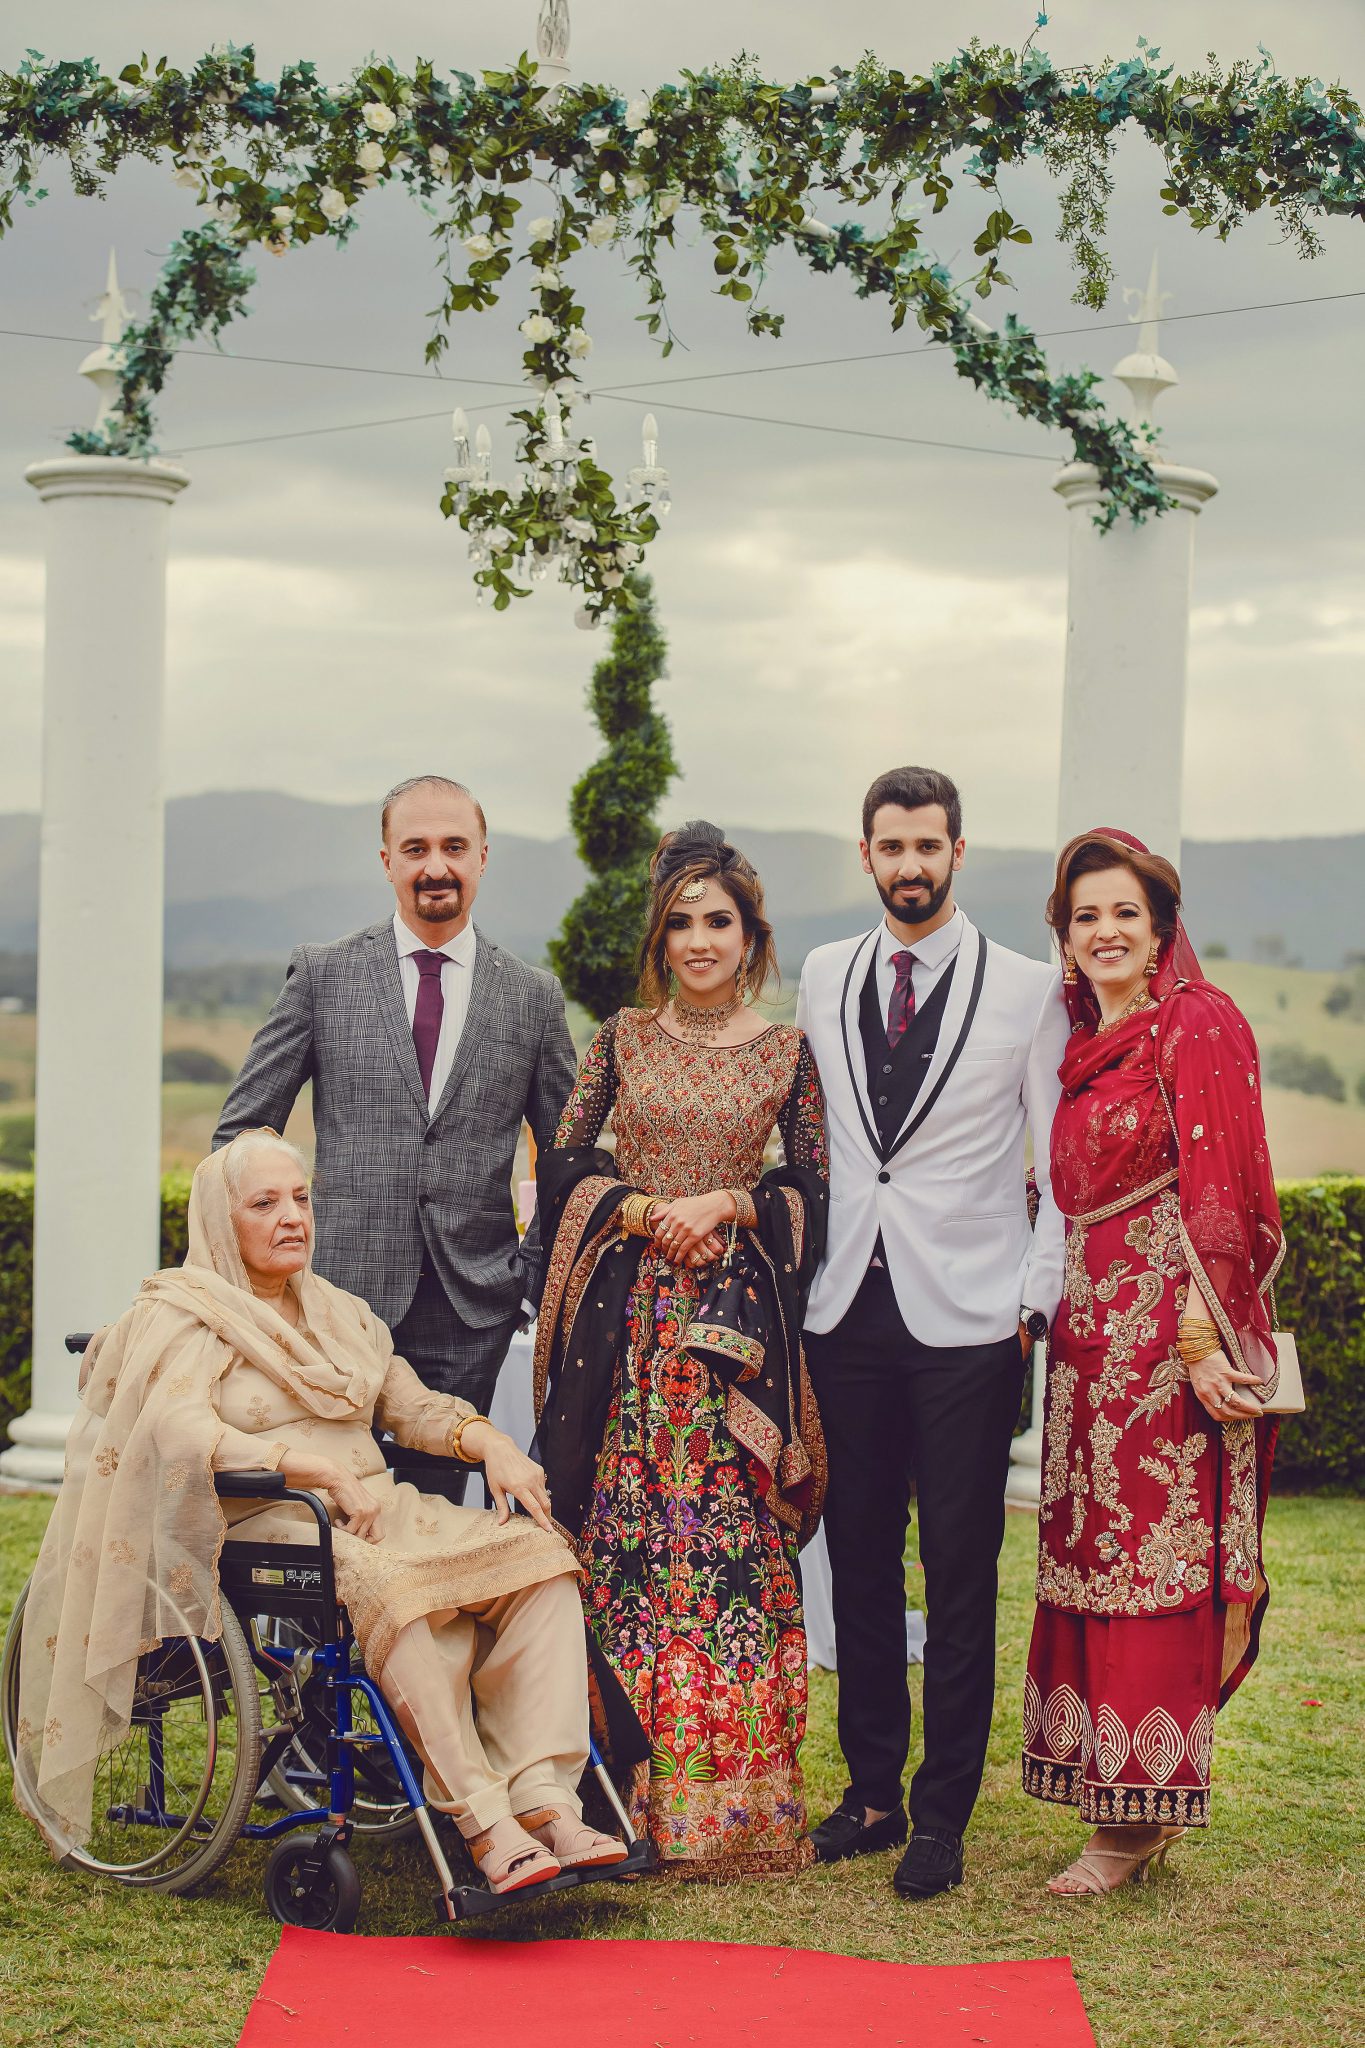 The Groom and Bride with their parents during photoshoot